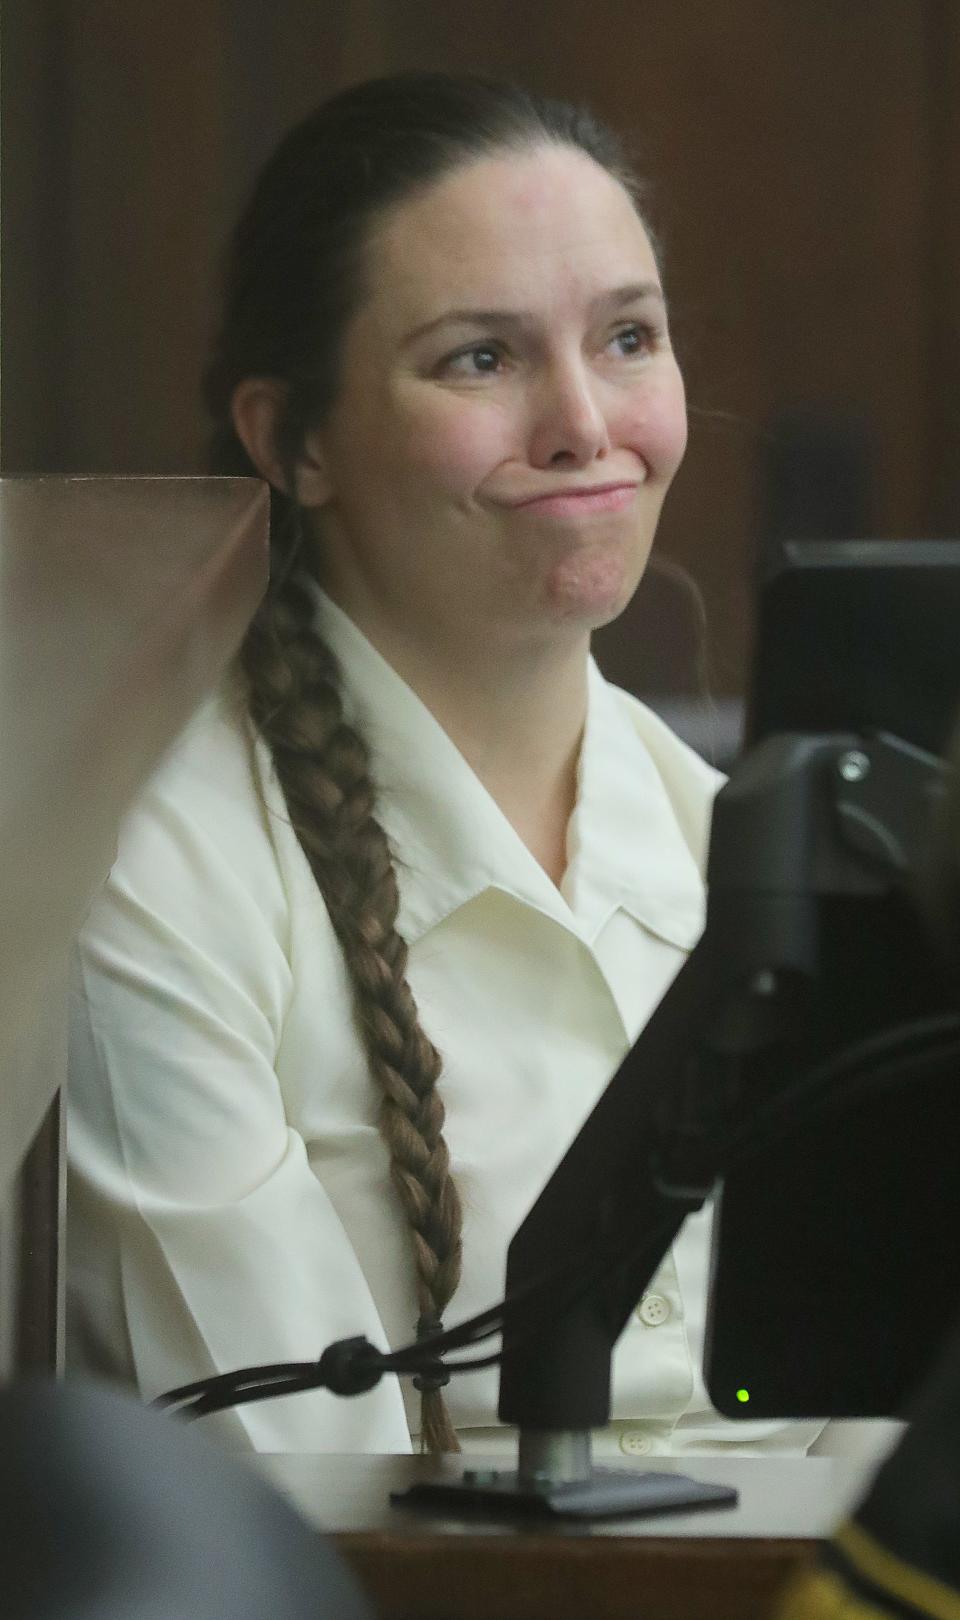 Erica Stefanko ponders a question from defense lawyer Jeff Laybourne while on the stand on Monday in Akron. Stefanko is being retried for her role in the 2012 murder of pizza delivery driver Ashley Biggs.